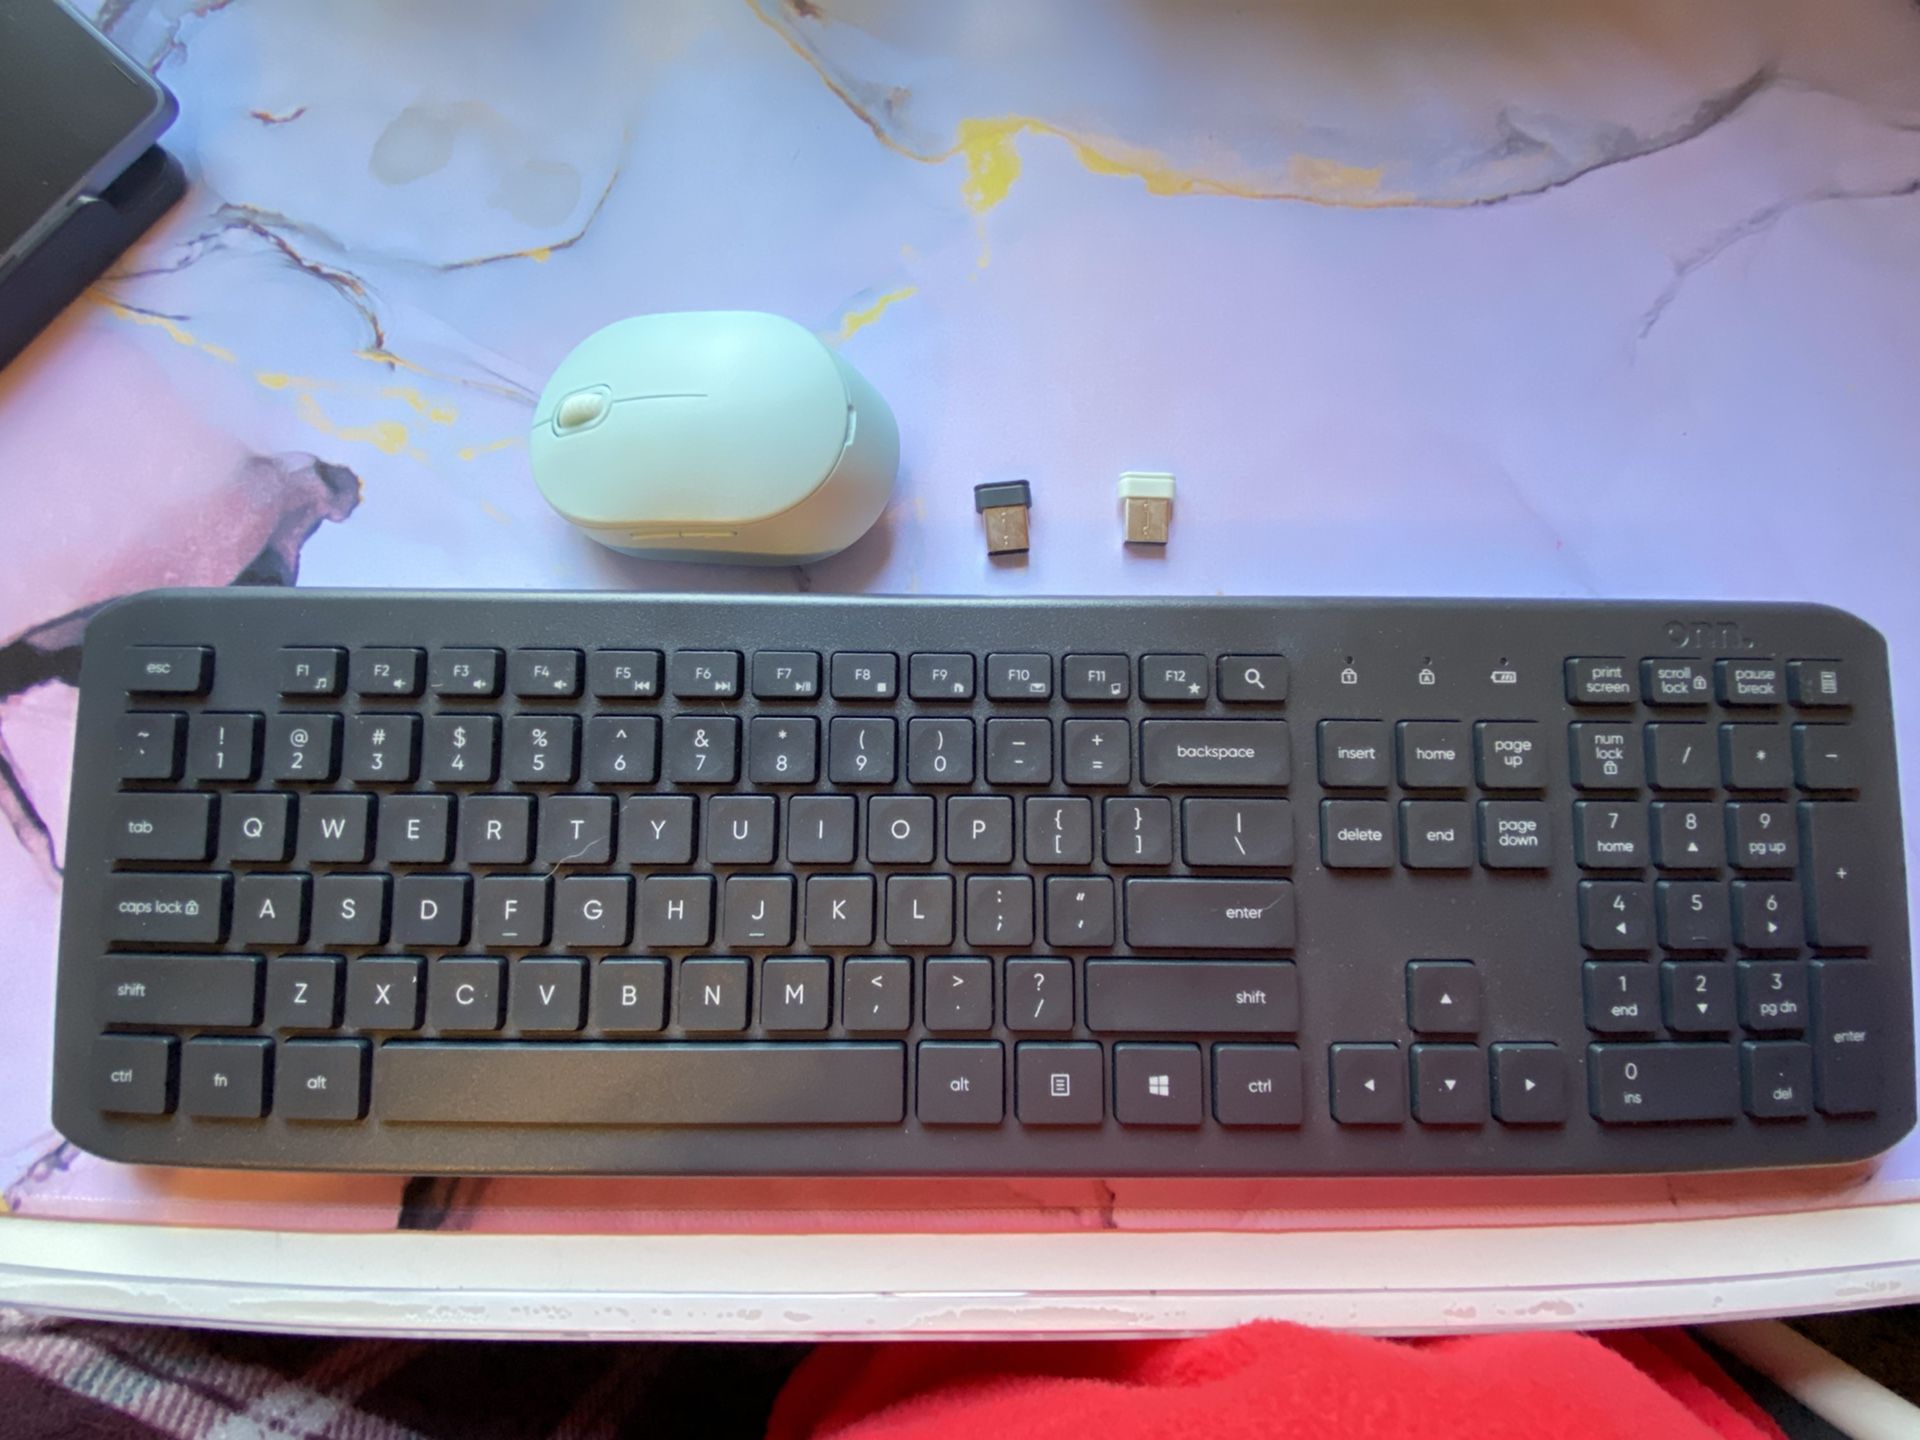 Onn. Wireless keyboard and mouse.